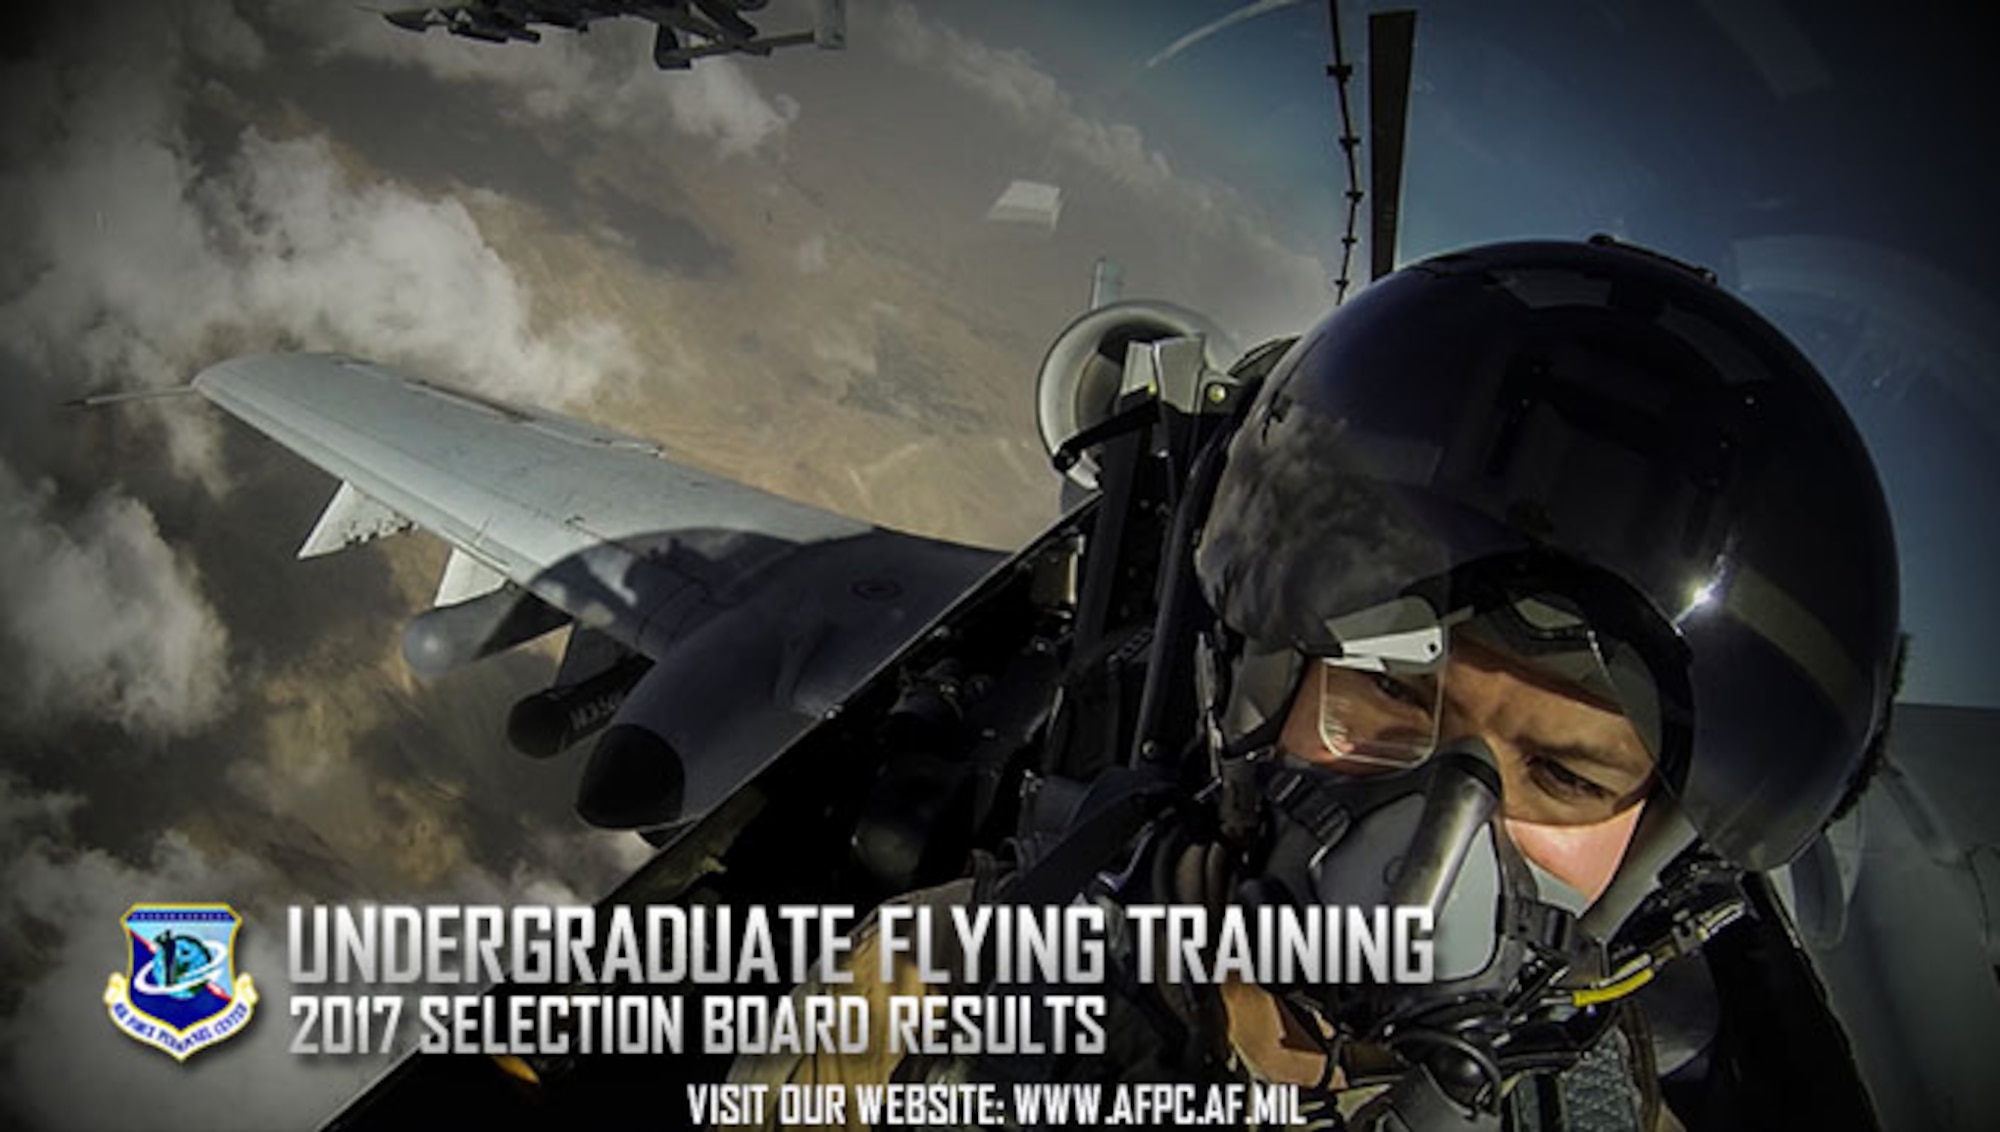 The results are in for the 2017 undergraduate flying training selection board. The Air Force has selected 100 company grade officers for pilot, remotely piloted aircraft pilot, combat systems officer and air battle manager training. (U.S. Air Force photo by Senior Airman Matthew Bruch)